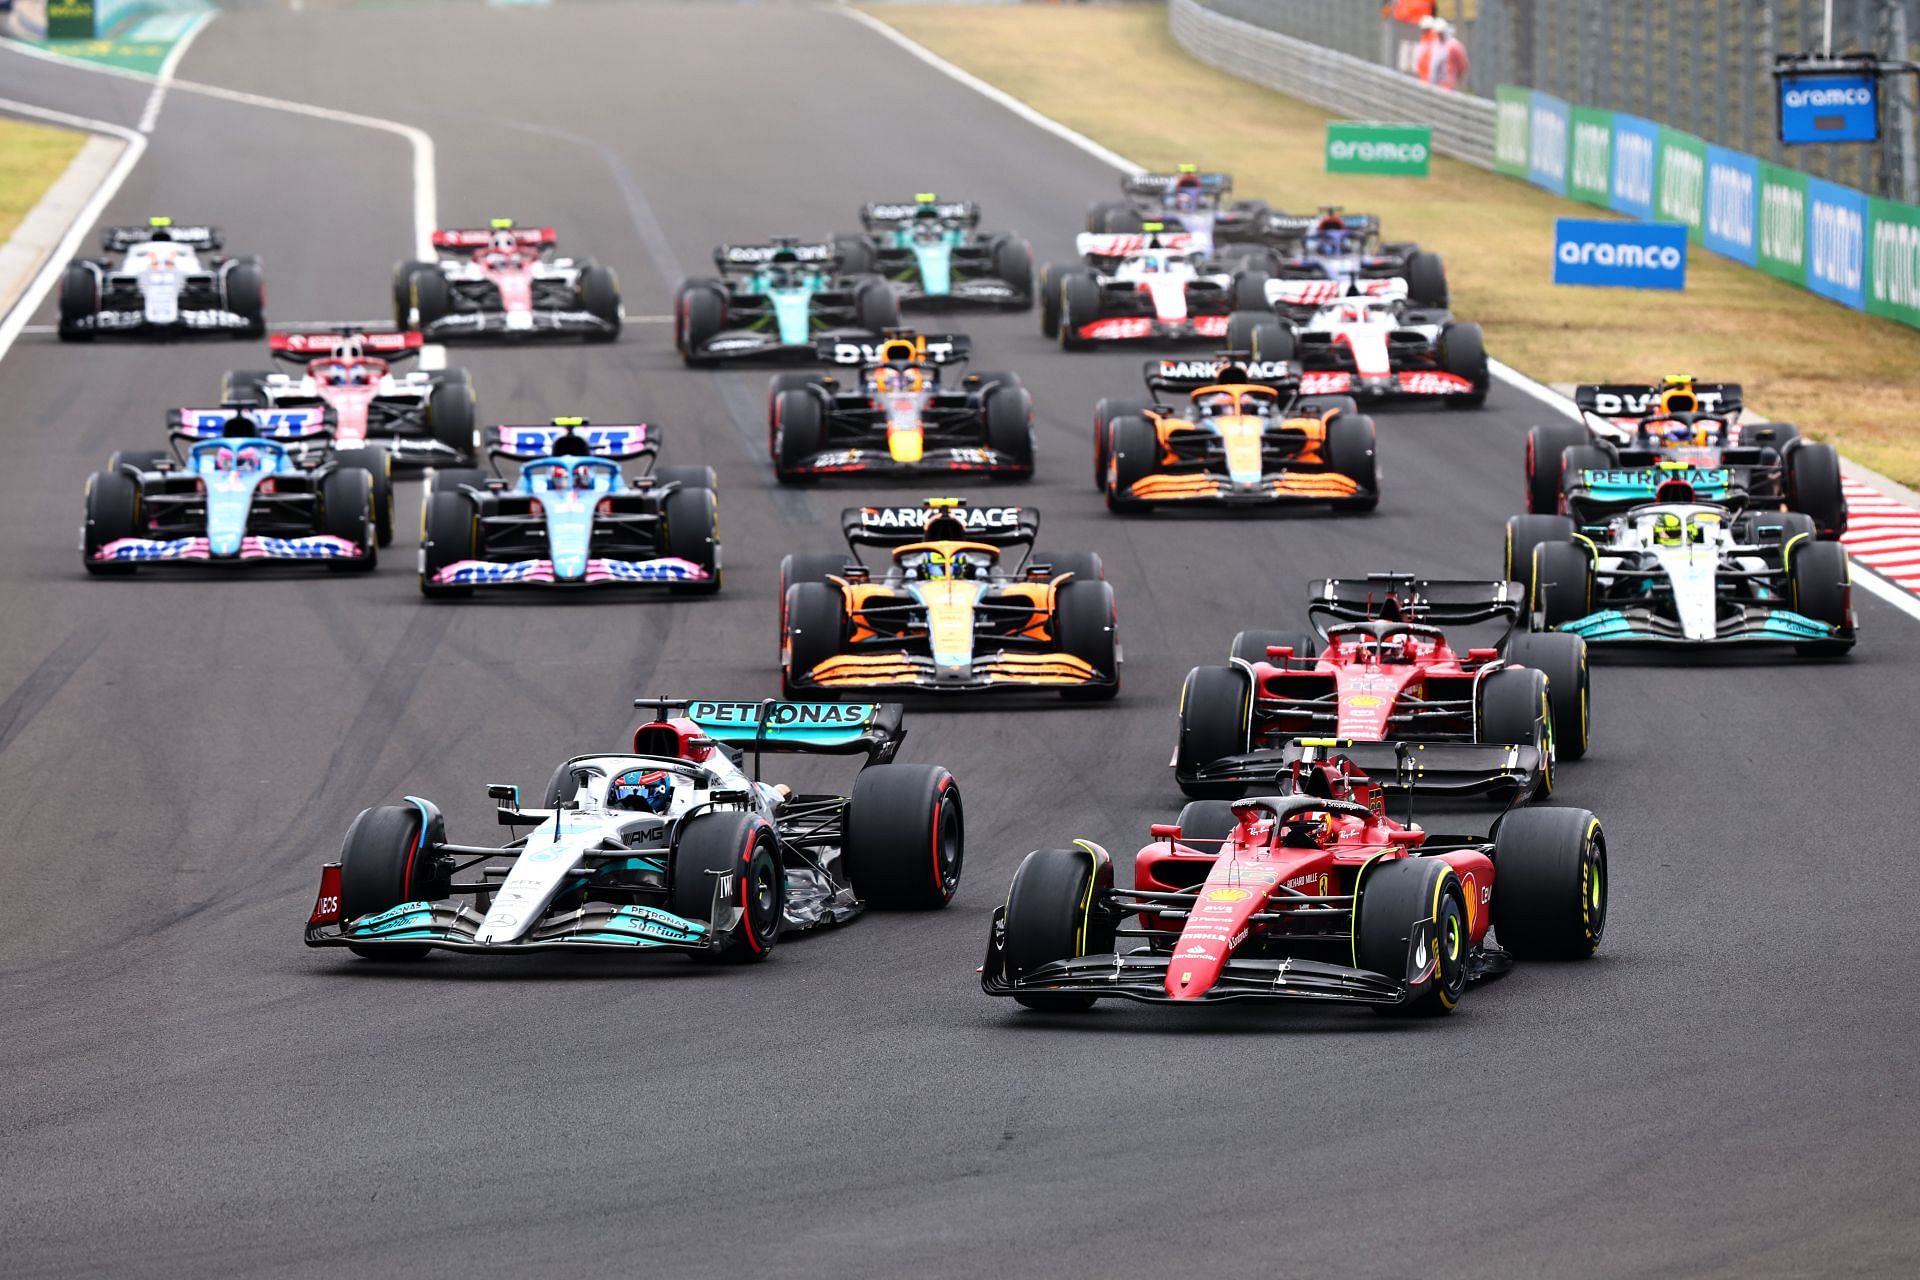 2023 Hungarian Grand Prix What time is the F1 main race today (Sunday)?